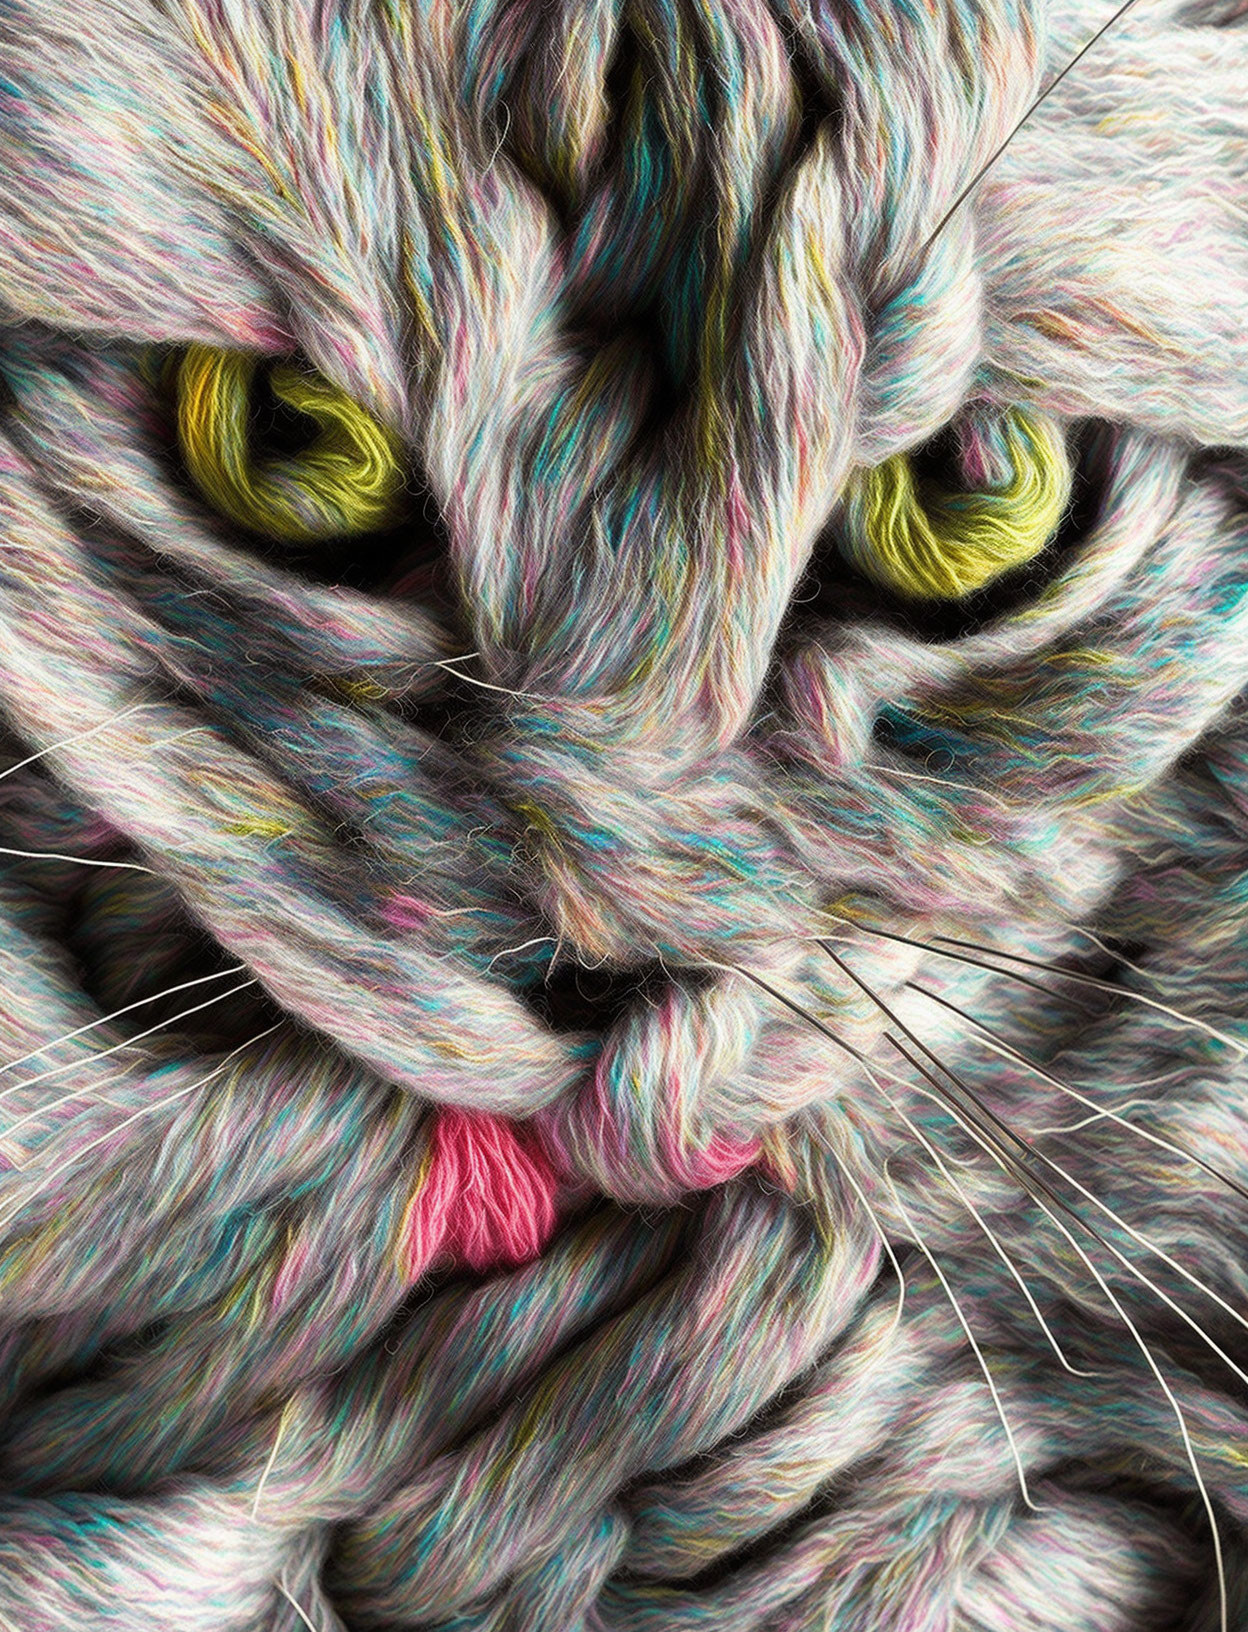 Colorful digital art: Intricate yarn-like cat with yellow eyes and pink nose.